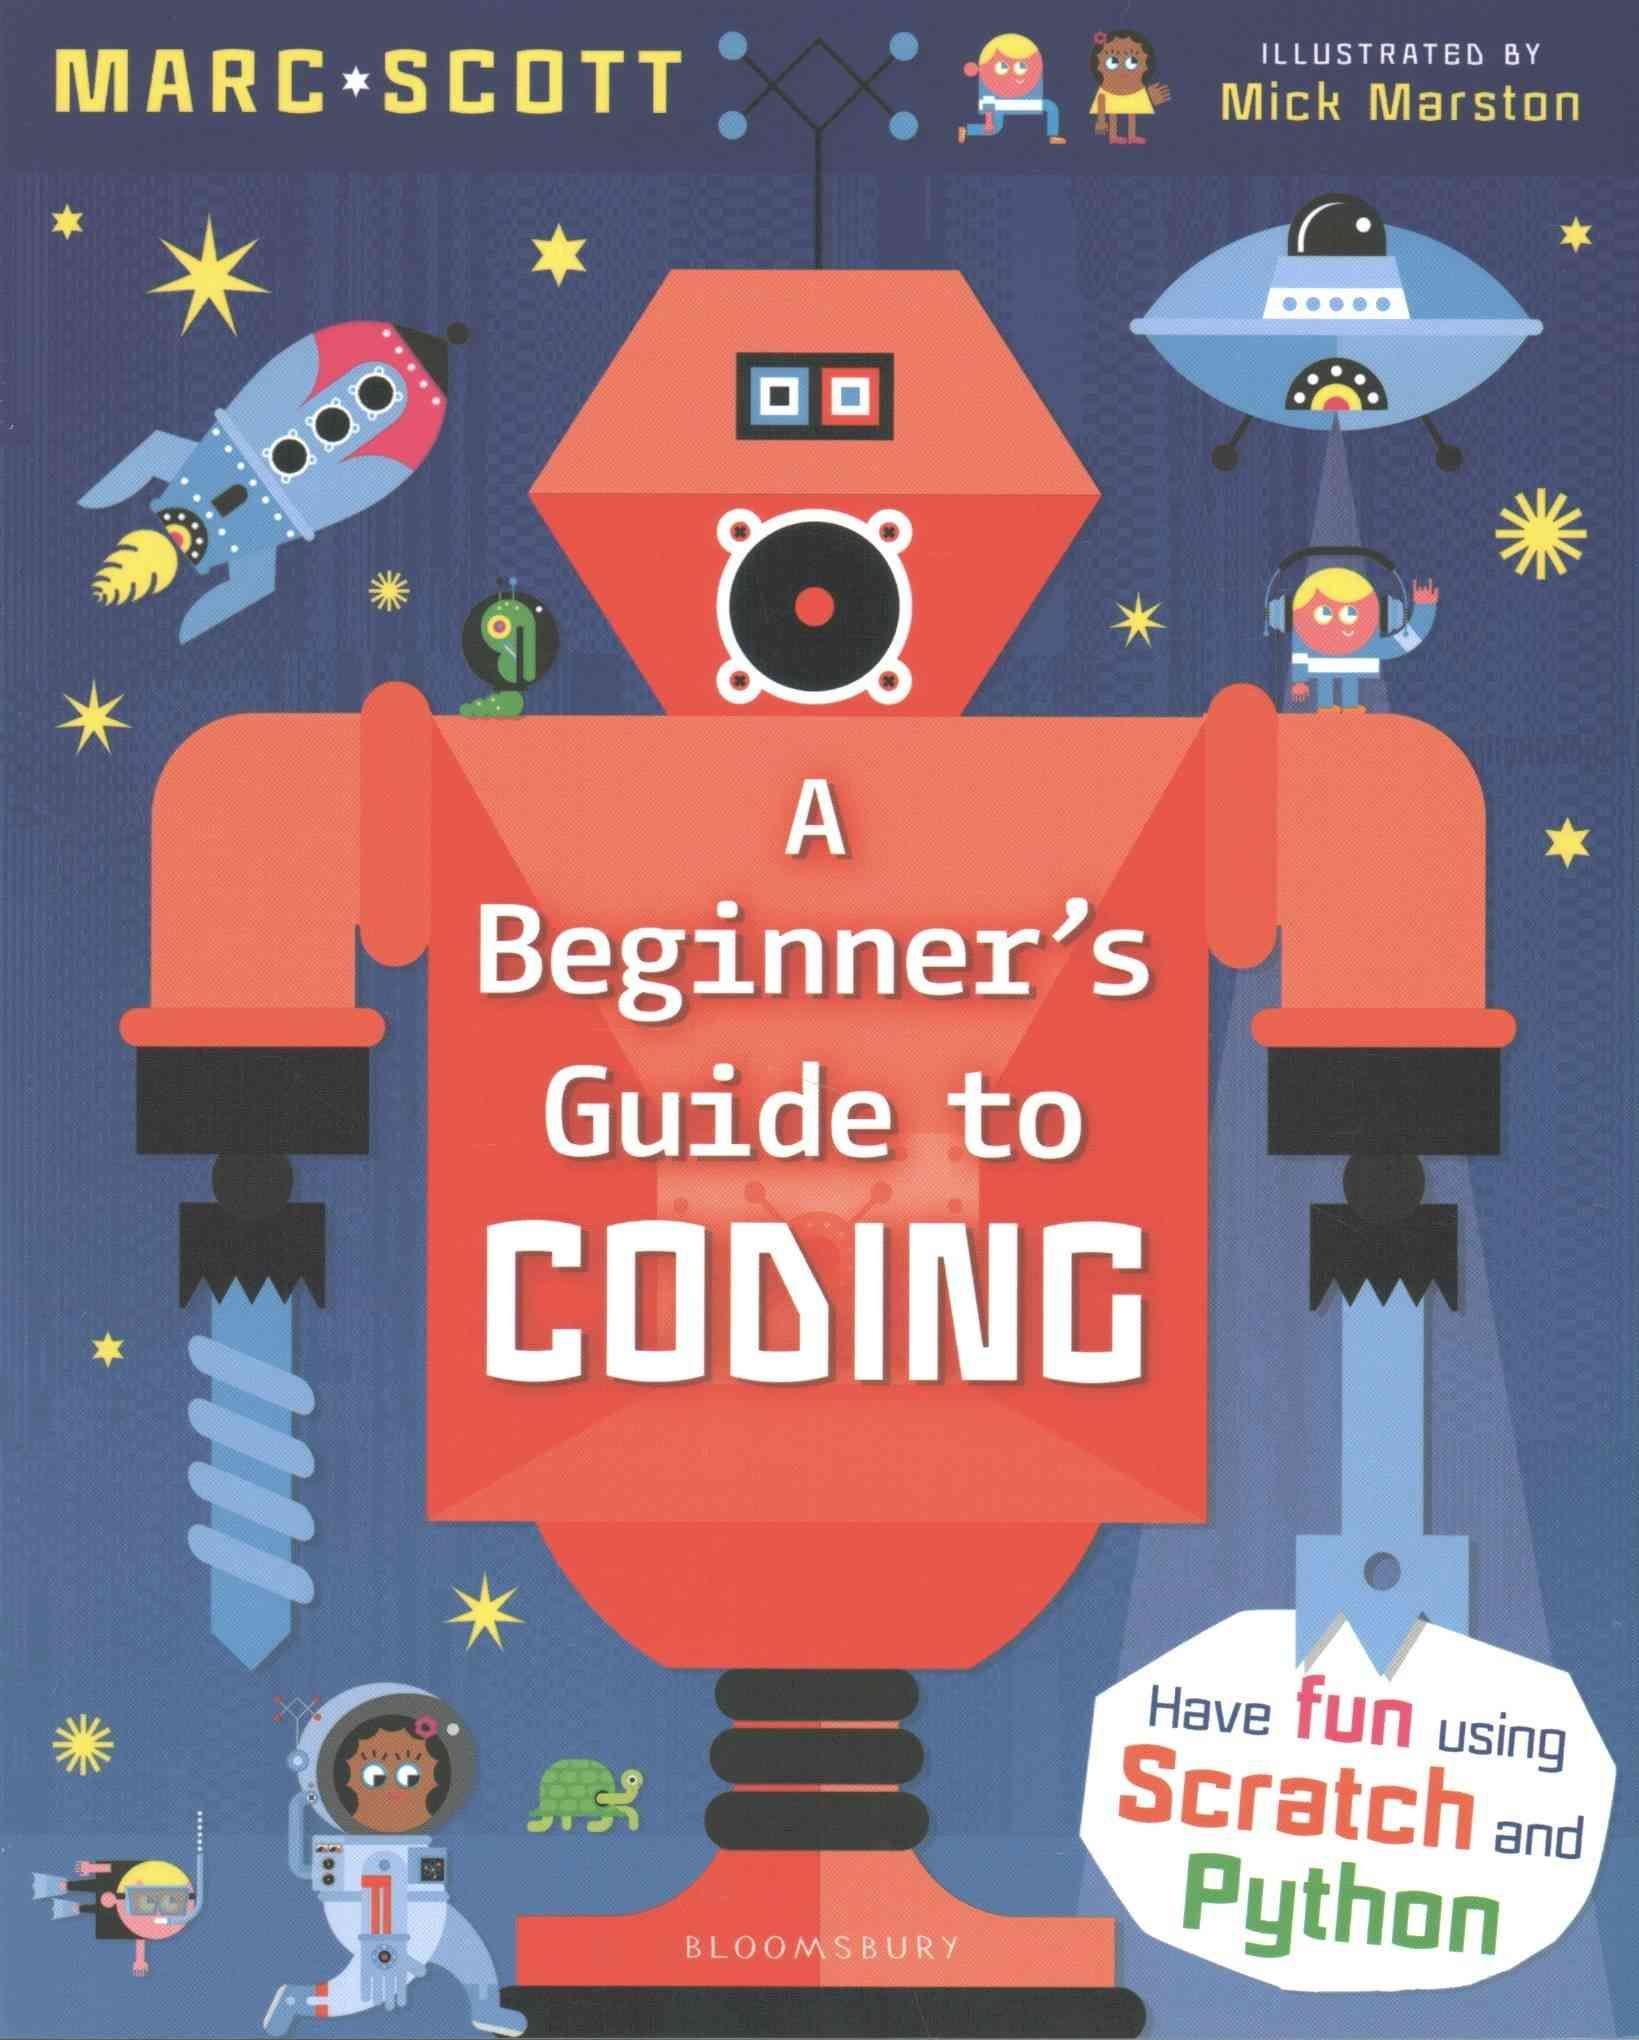 A Beginner's Guide to Coding